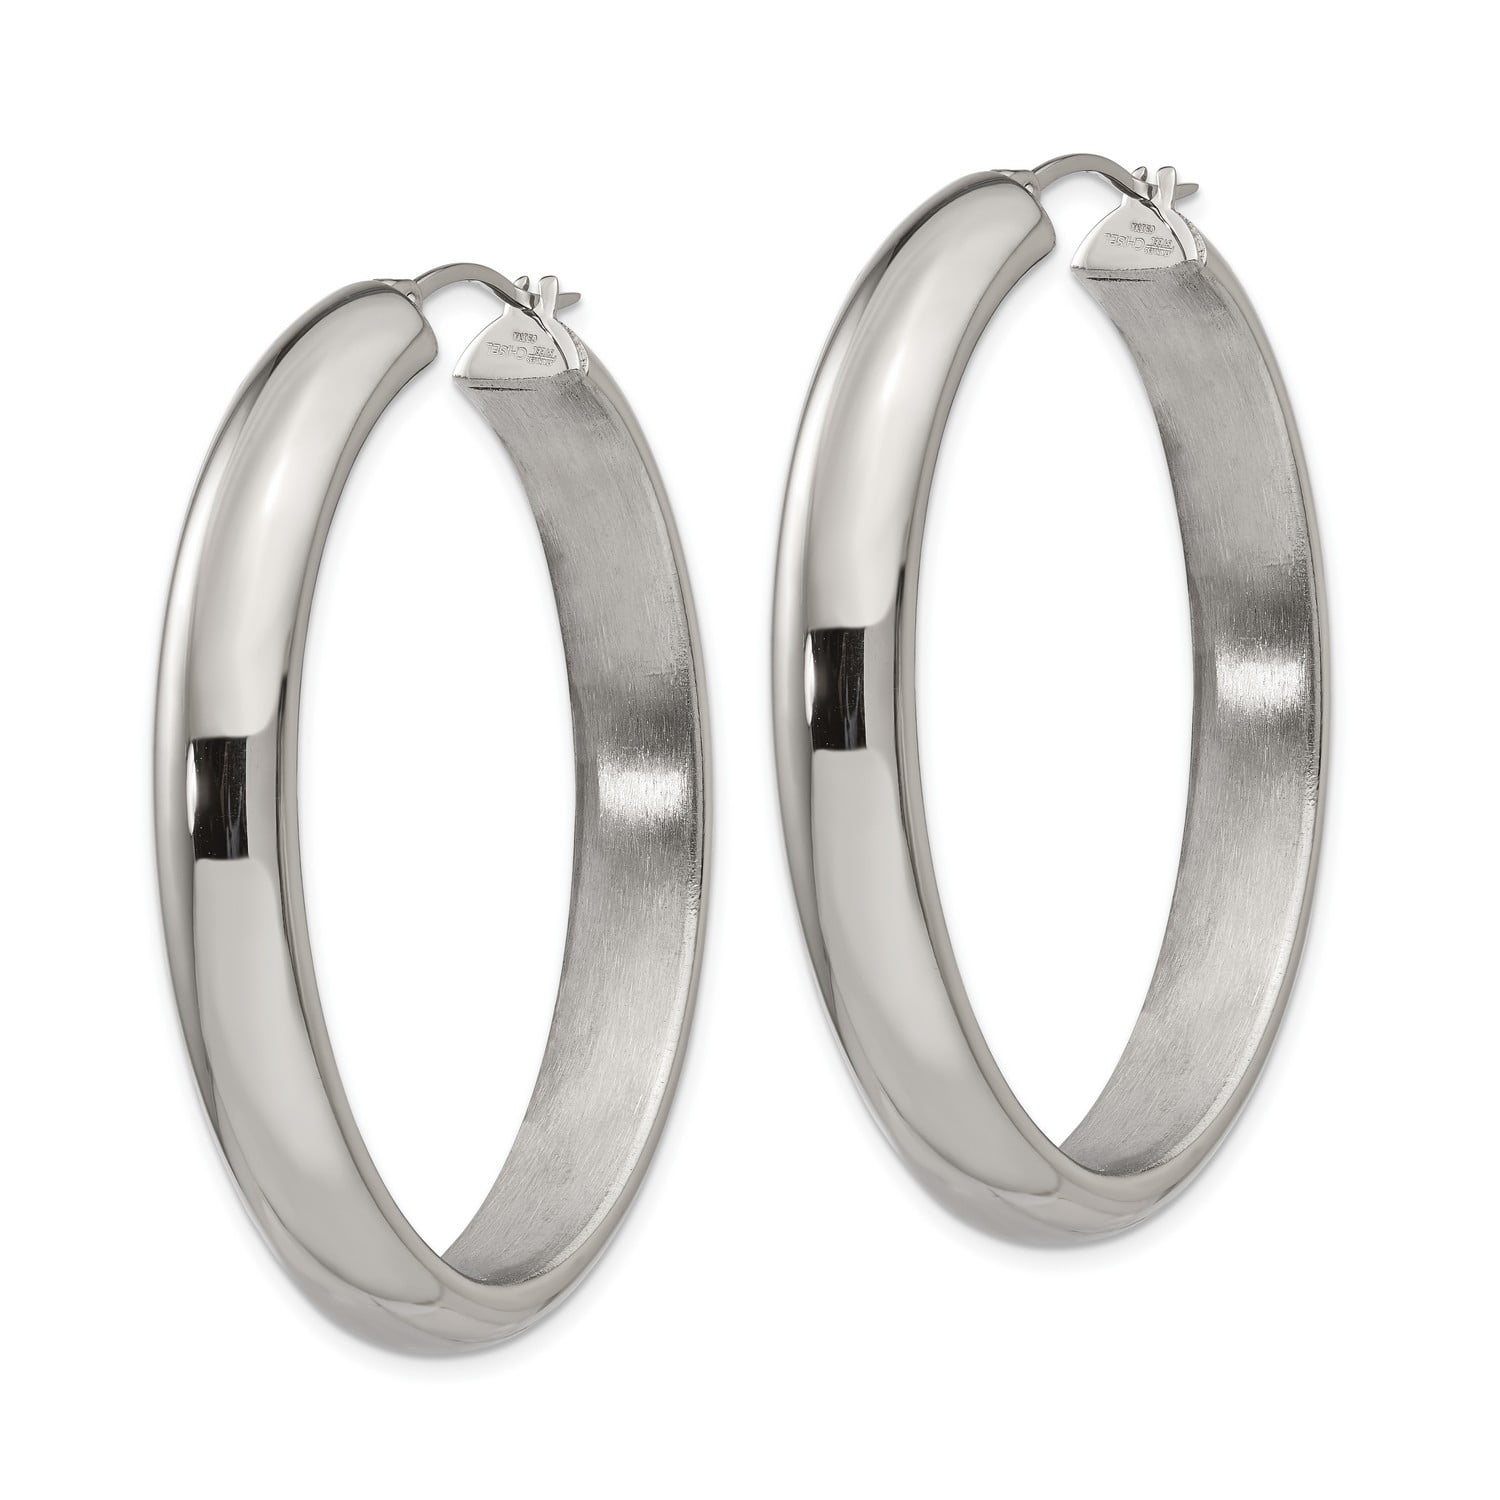 40mm x 48mm Stainless Steel Polished Hollow Oval Hoop Earrings